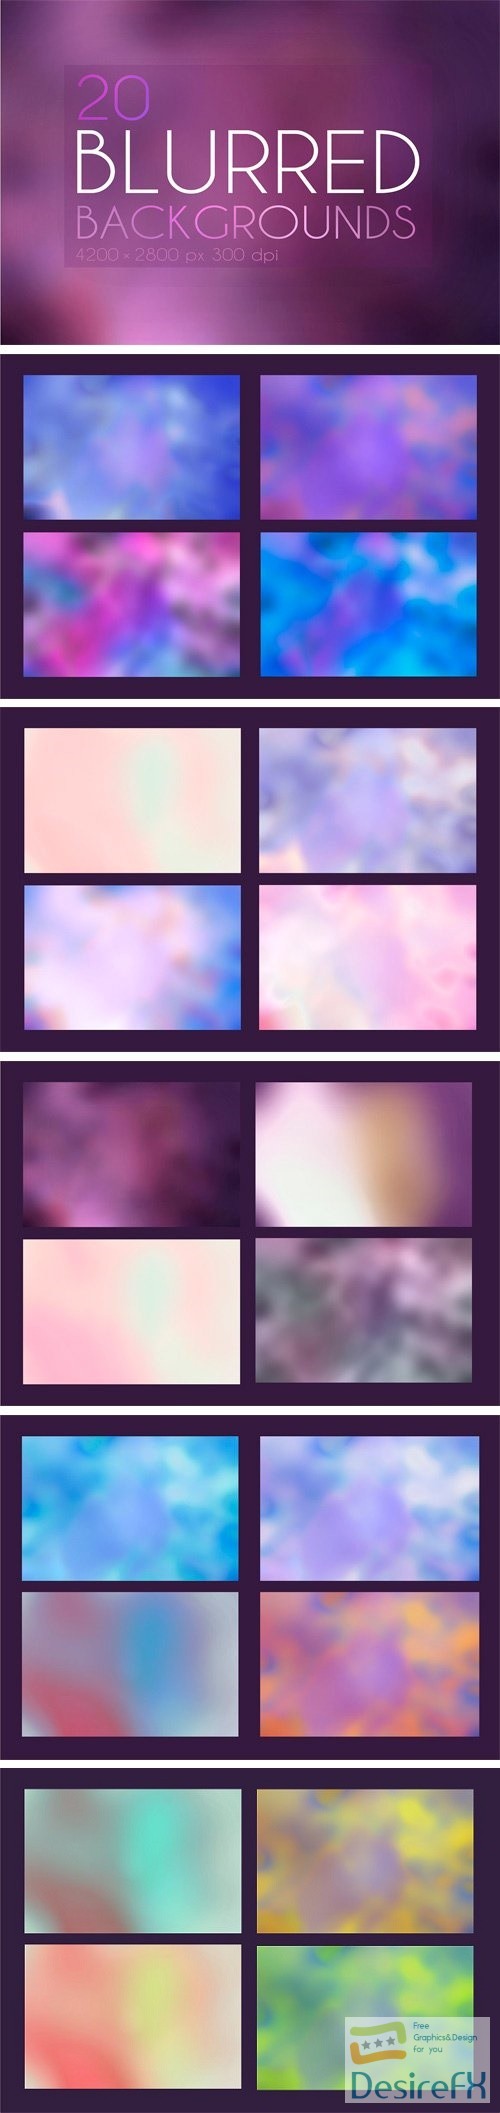 Blurred Backgrounds 2510879